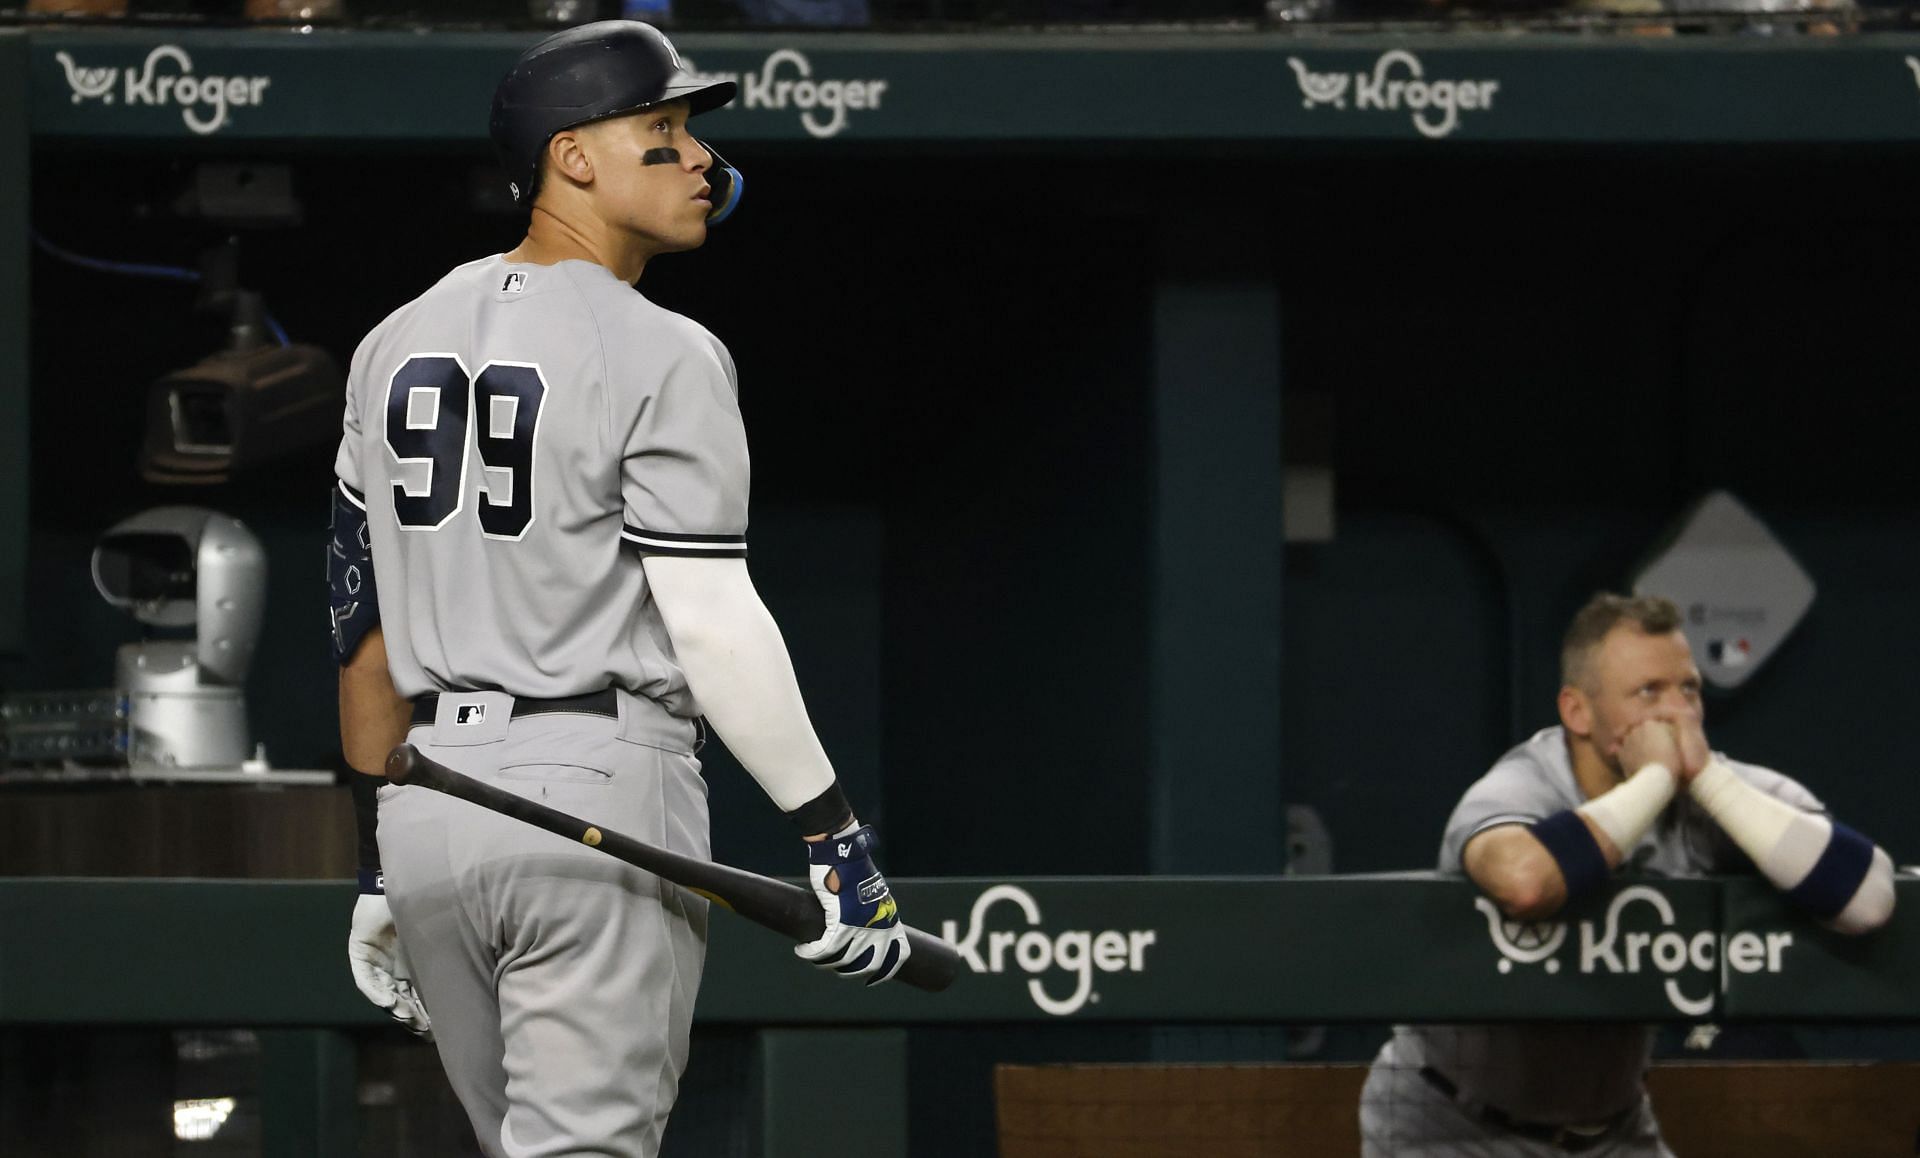 You come to the plate 600 times. You're telling me you can't hit 80 out - Aaron  Judge's dad believes the New York Yankees slugger should be able to become  the undisputed